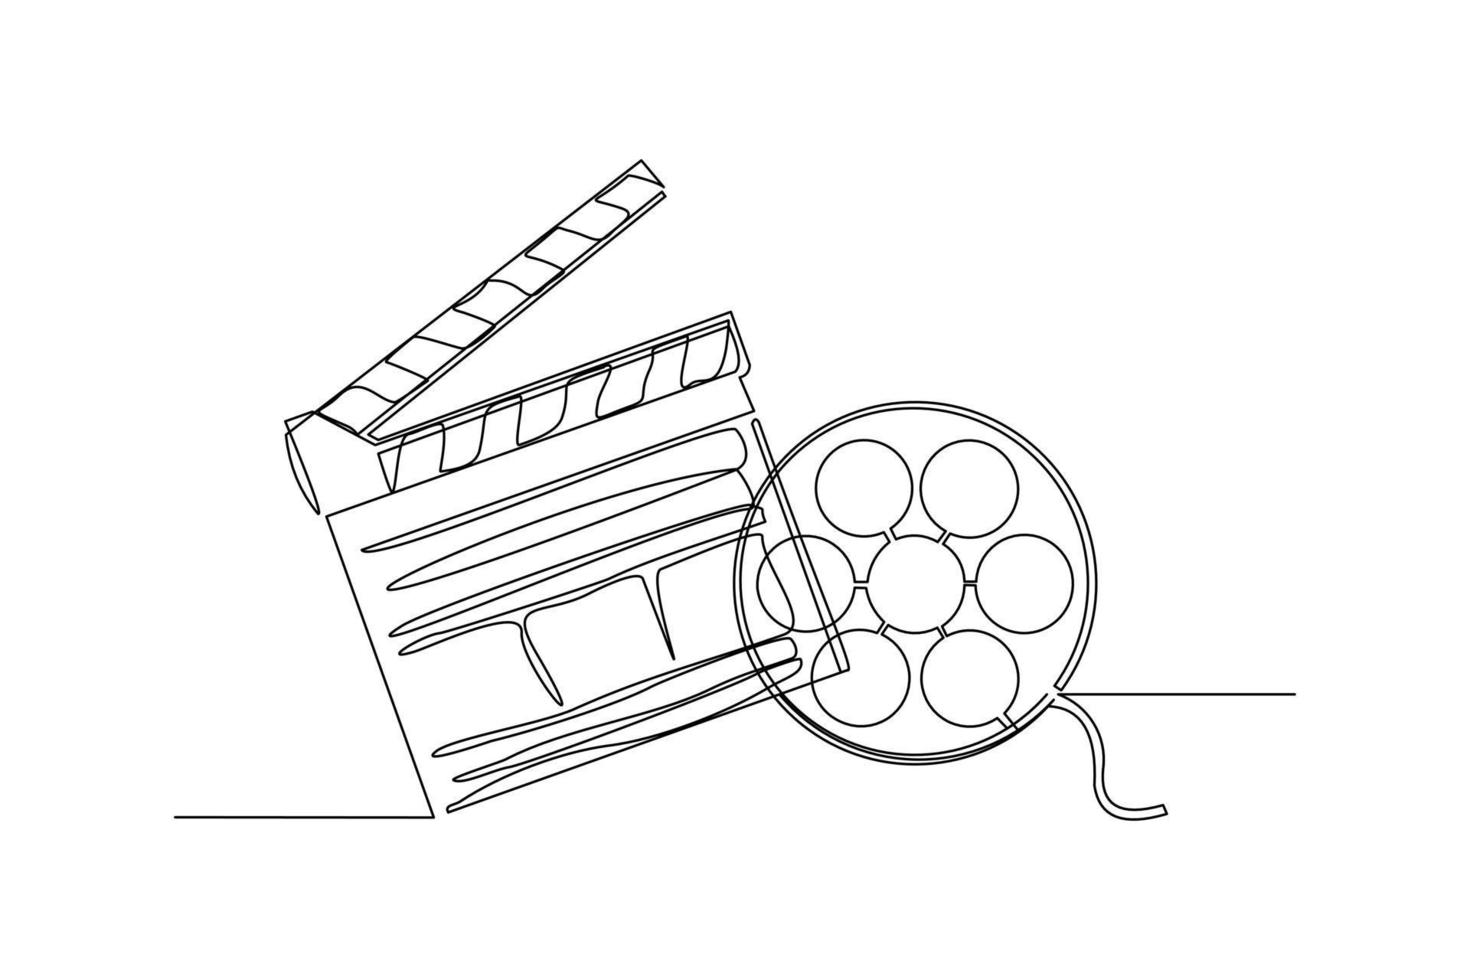 Continuous line drawing of retro old classic movie board clapper and film reel. One single line art vintage film scene taker item concept design graphic vector illustration